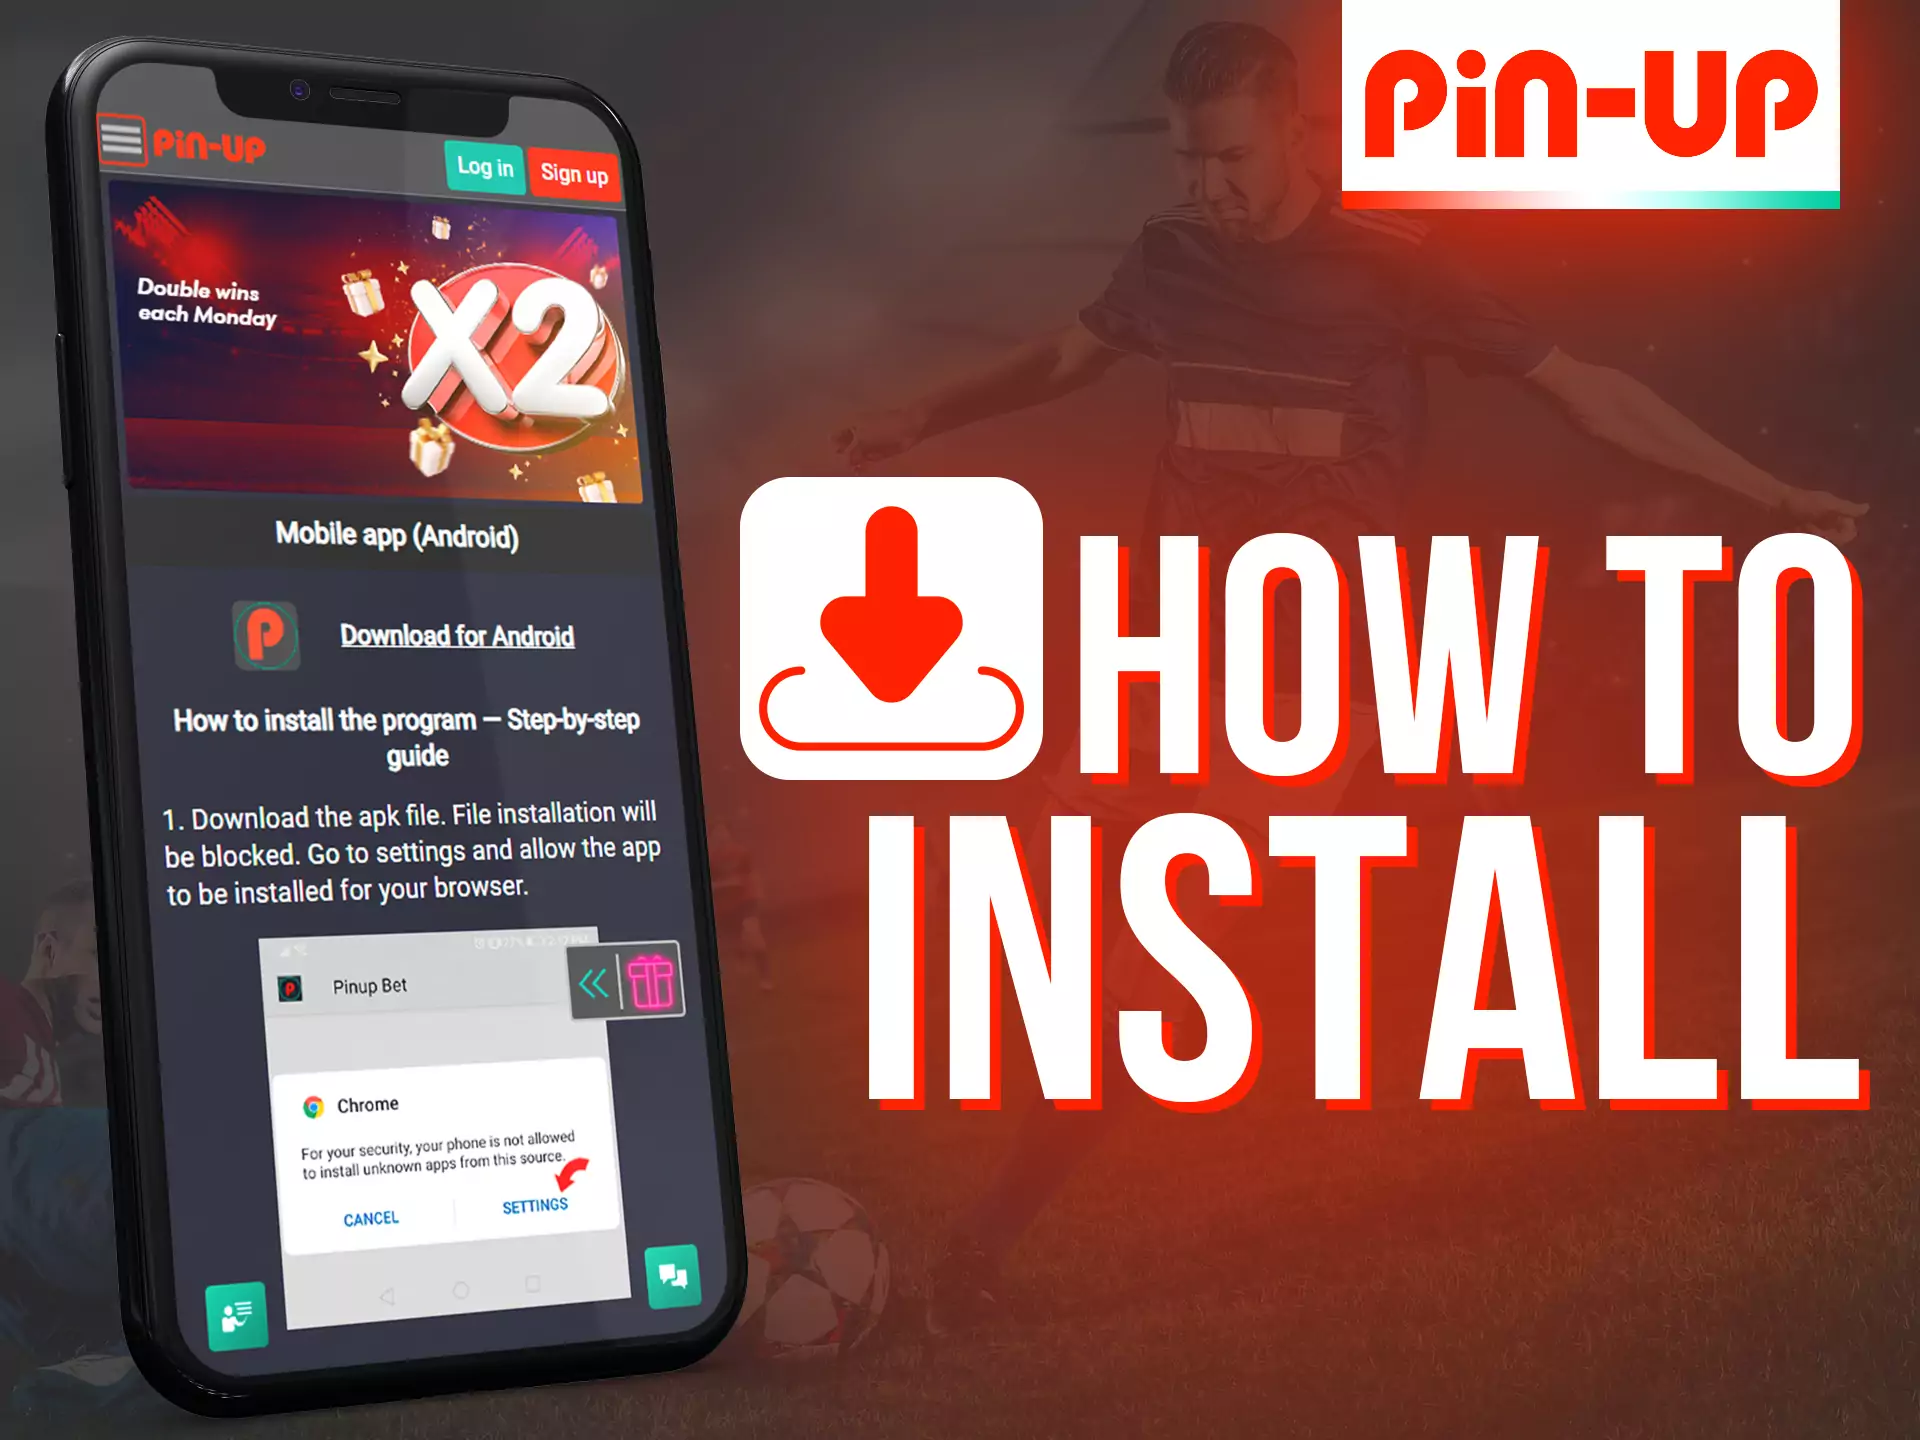 With these instructions, it's easy to install the Pin-Up app on your device.